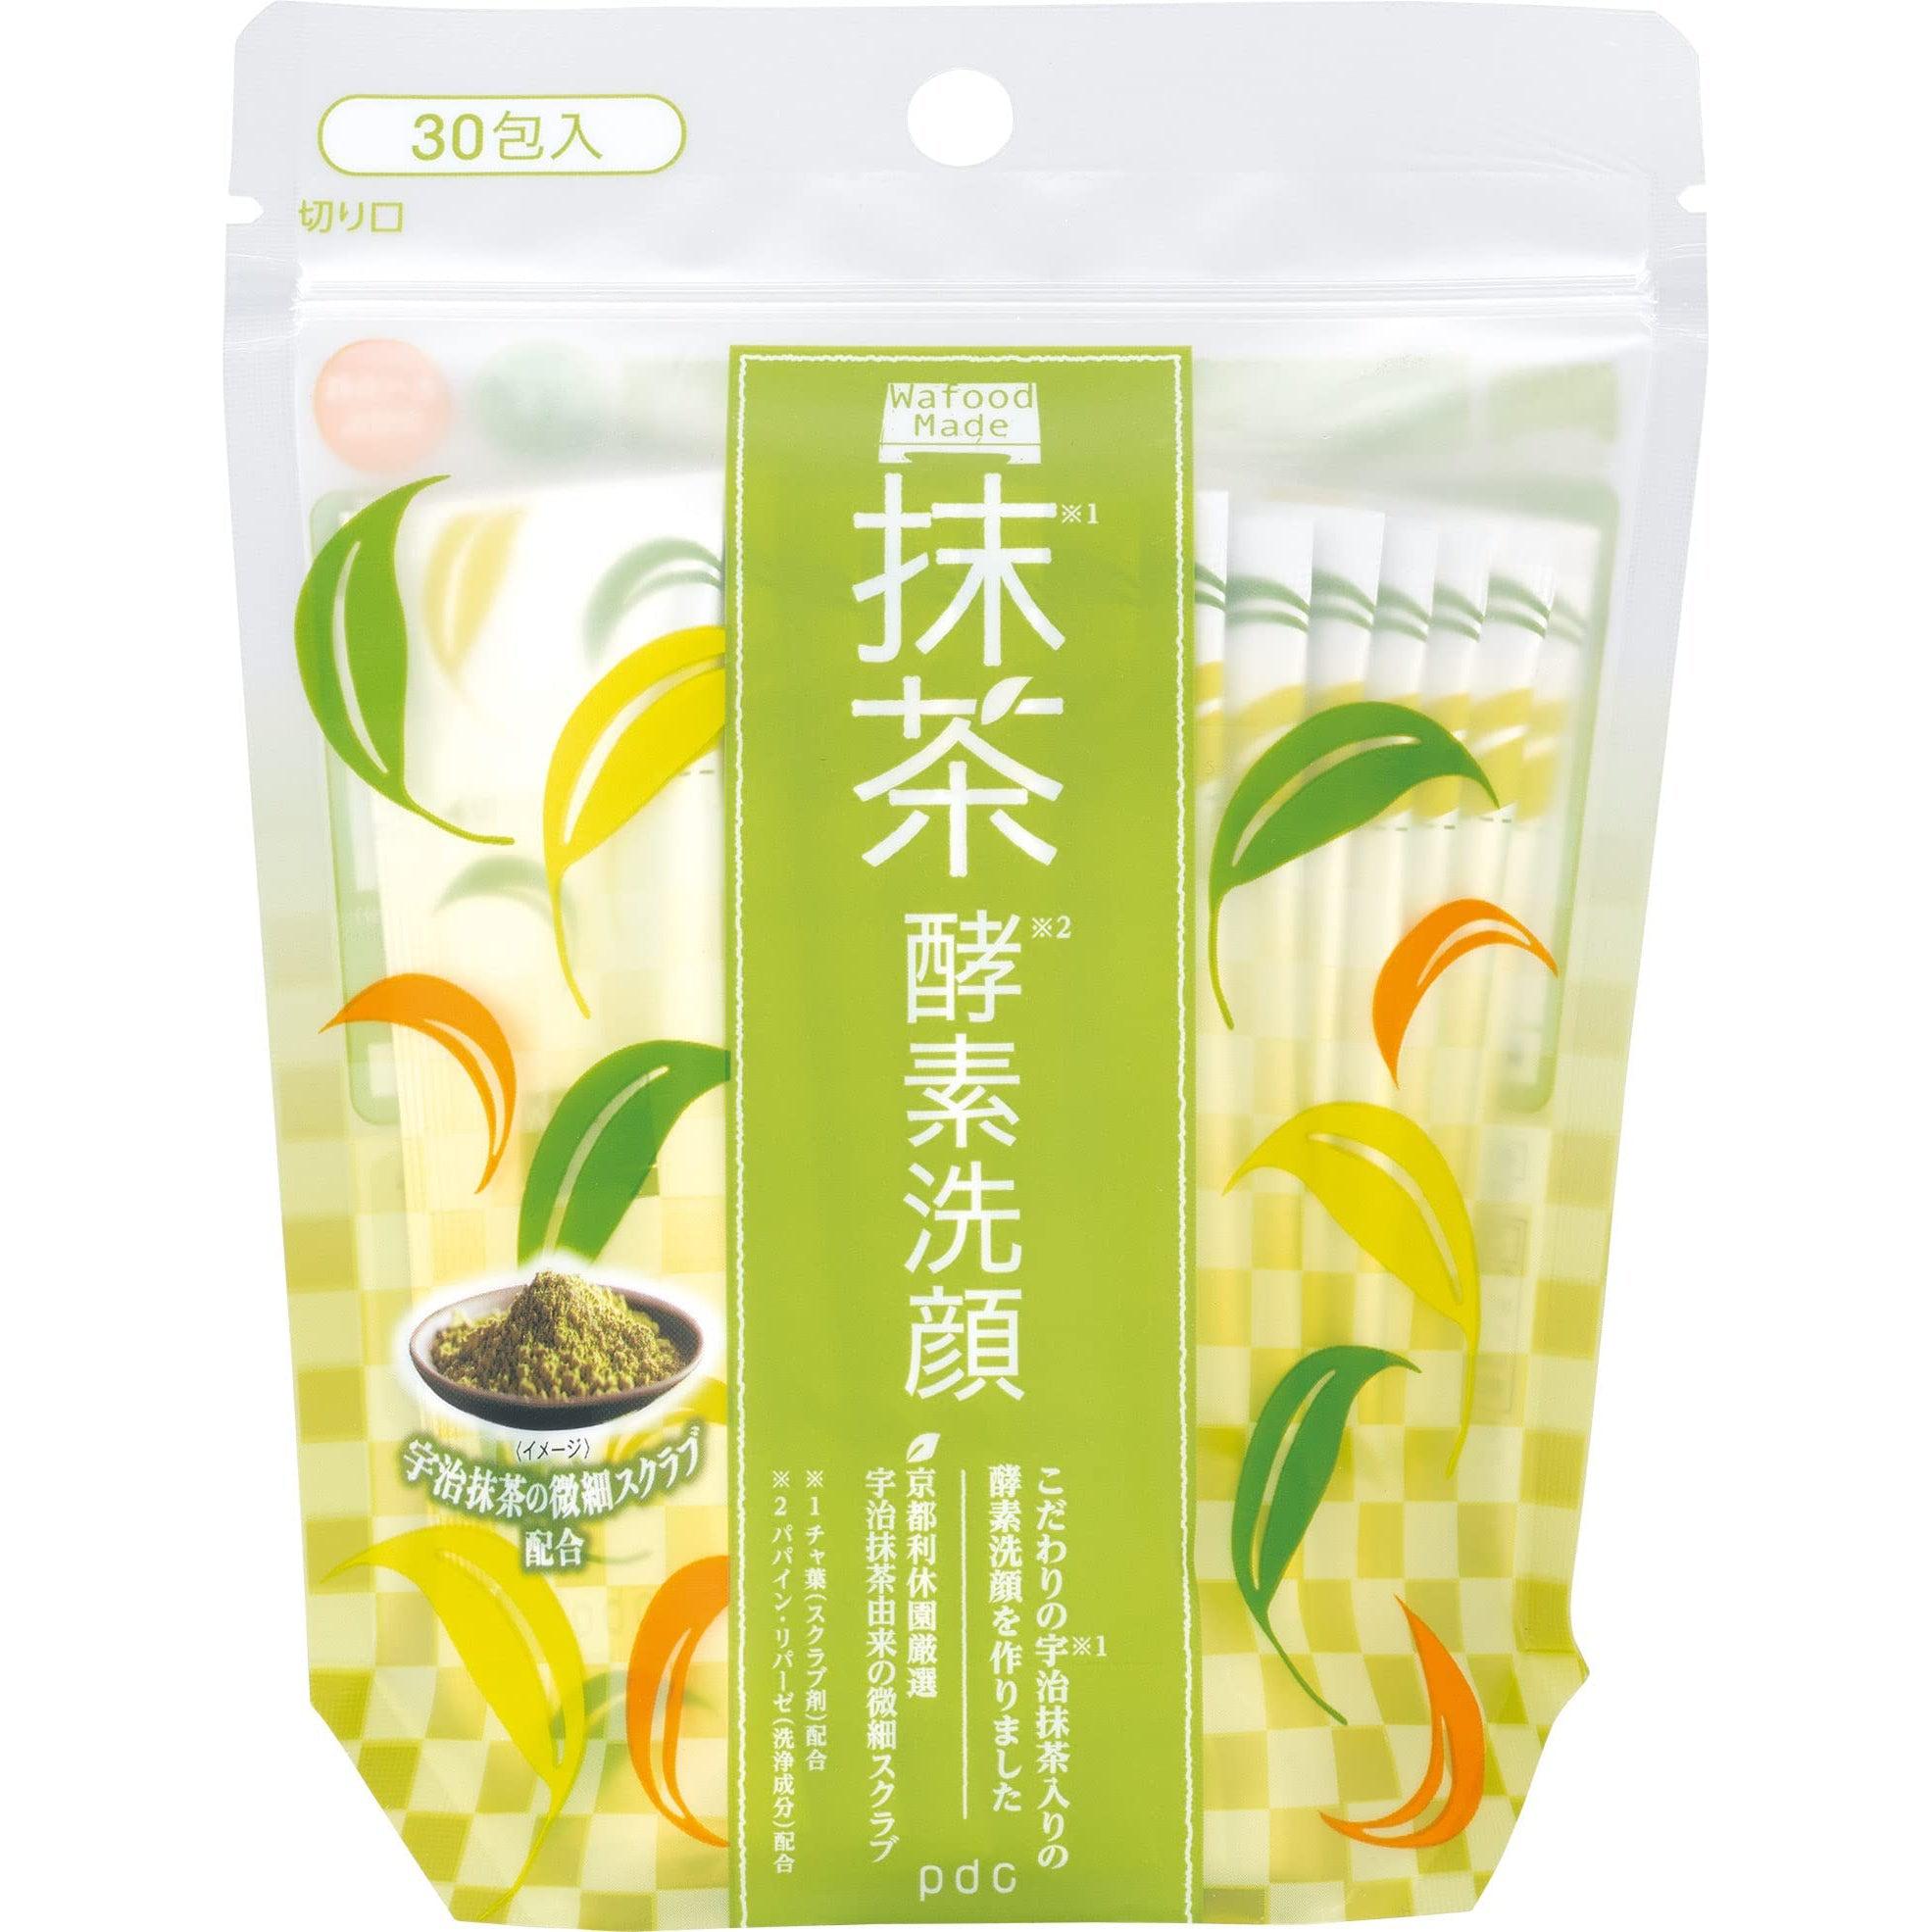 pdc Wafood Made Uji Matcha Enzyme Face Wash 30 Packets